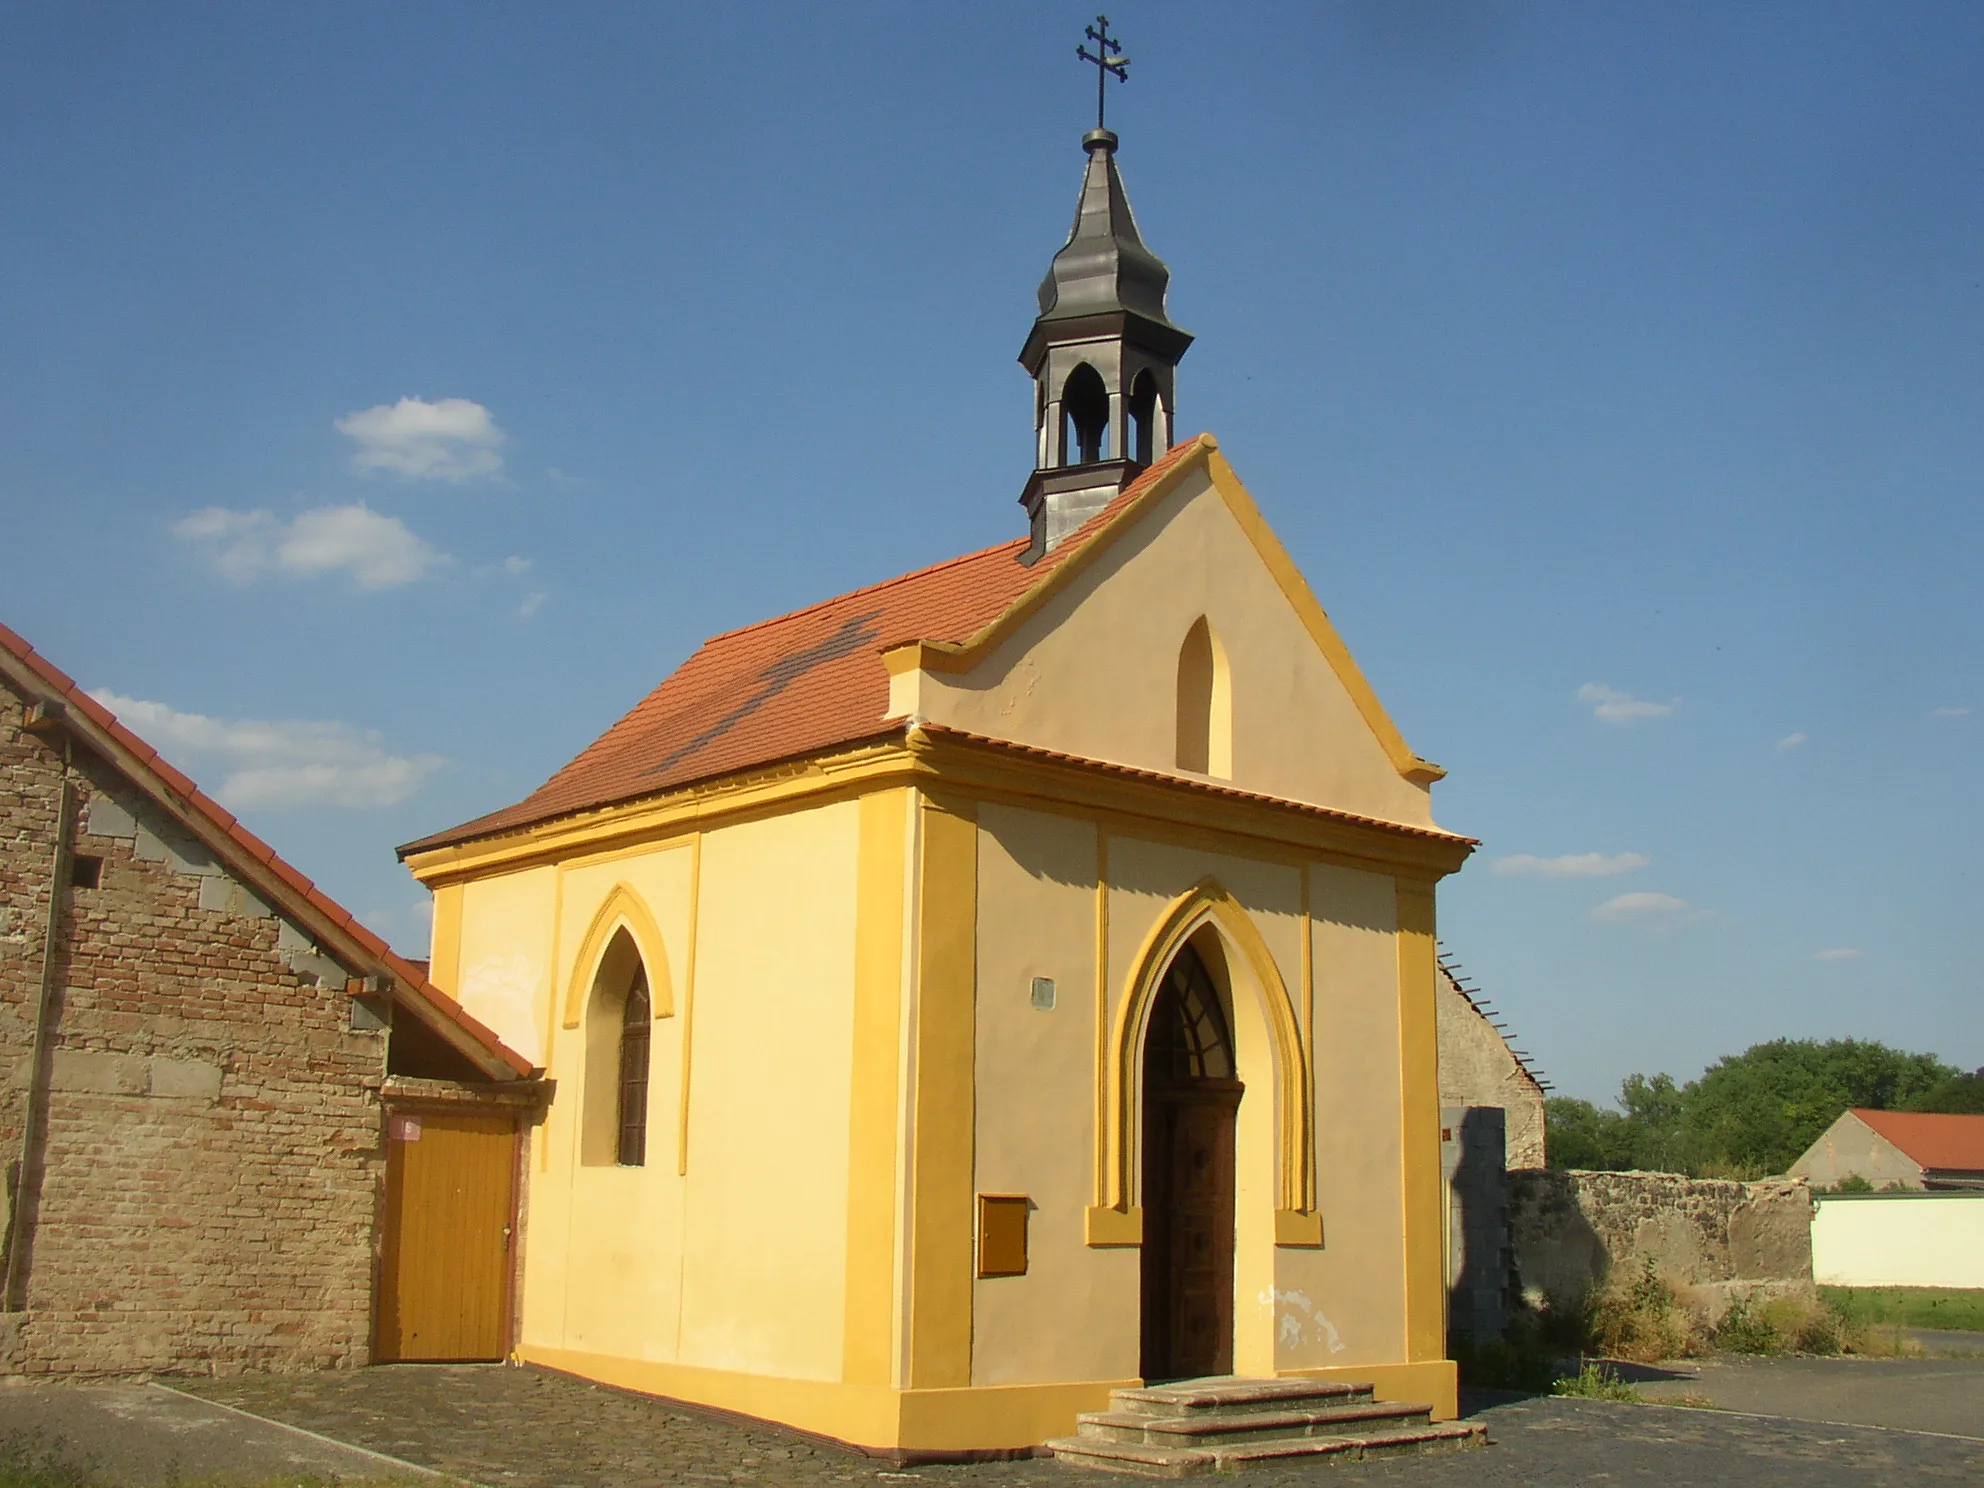 Photo showing: Brňany, Litoměřice District. Chapel of Our Lady of Sorrows and St John Nepomucene in the village. Originally a Baroque edifice from 1720s, rebuilt in style of Gothic Revival in 19th century.